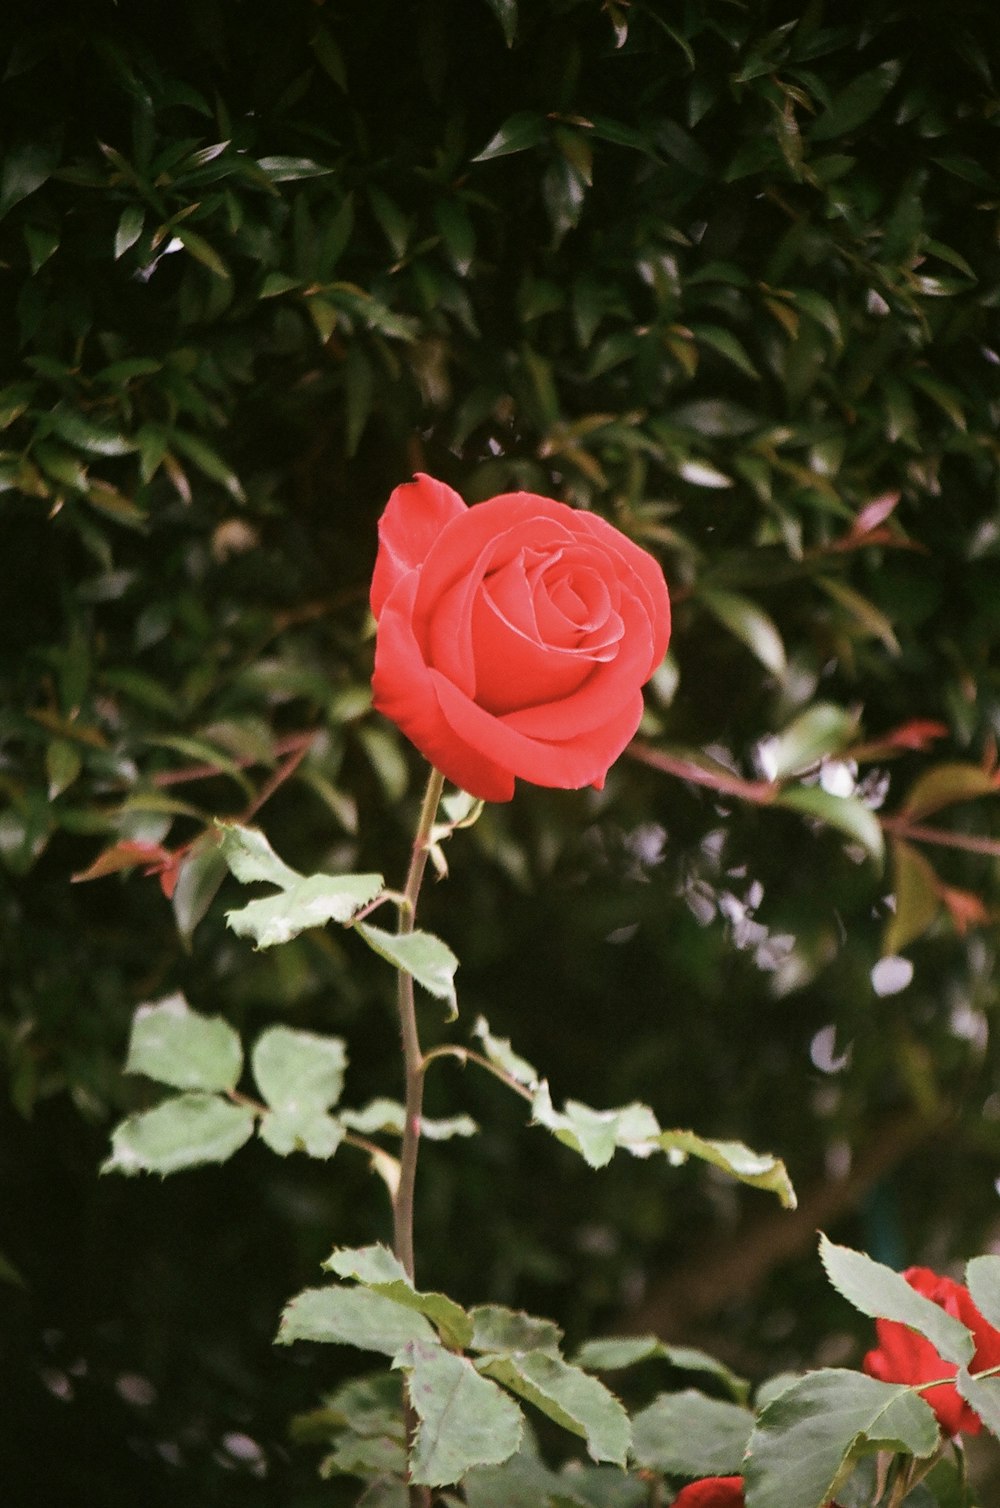 a single red rose with green leaves in the foreground